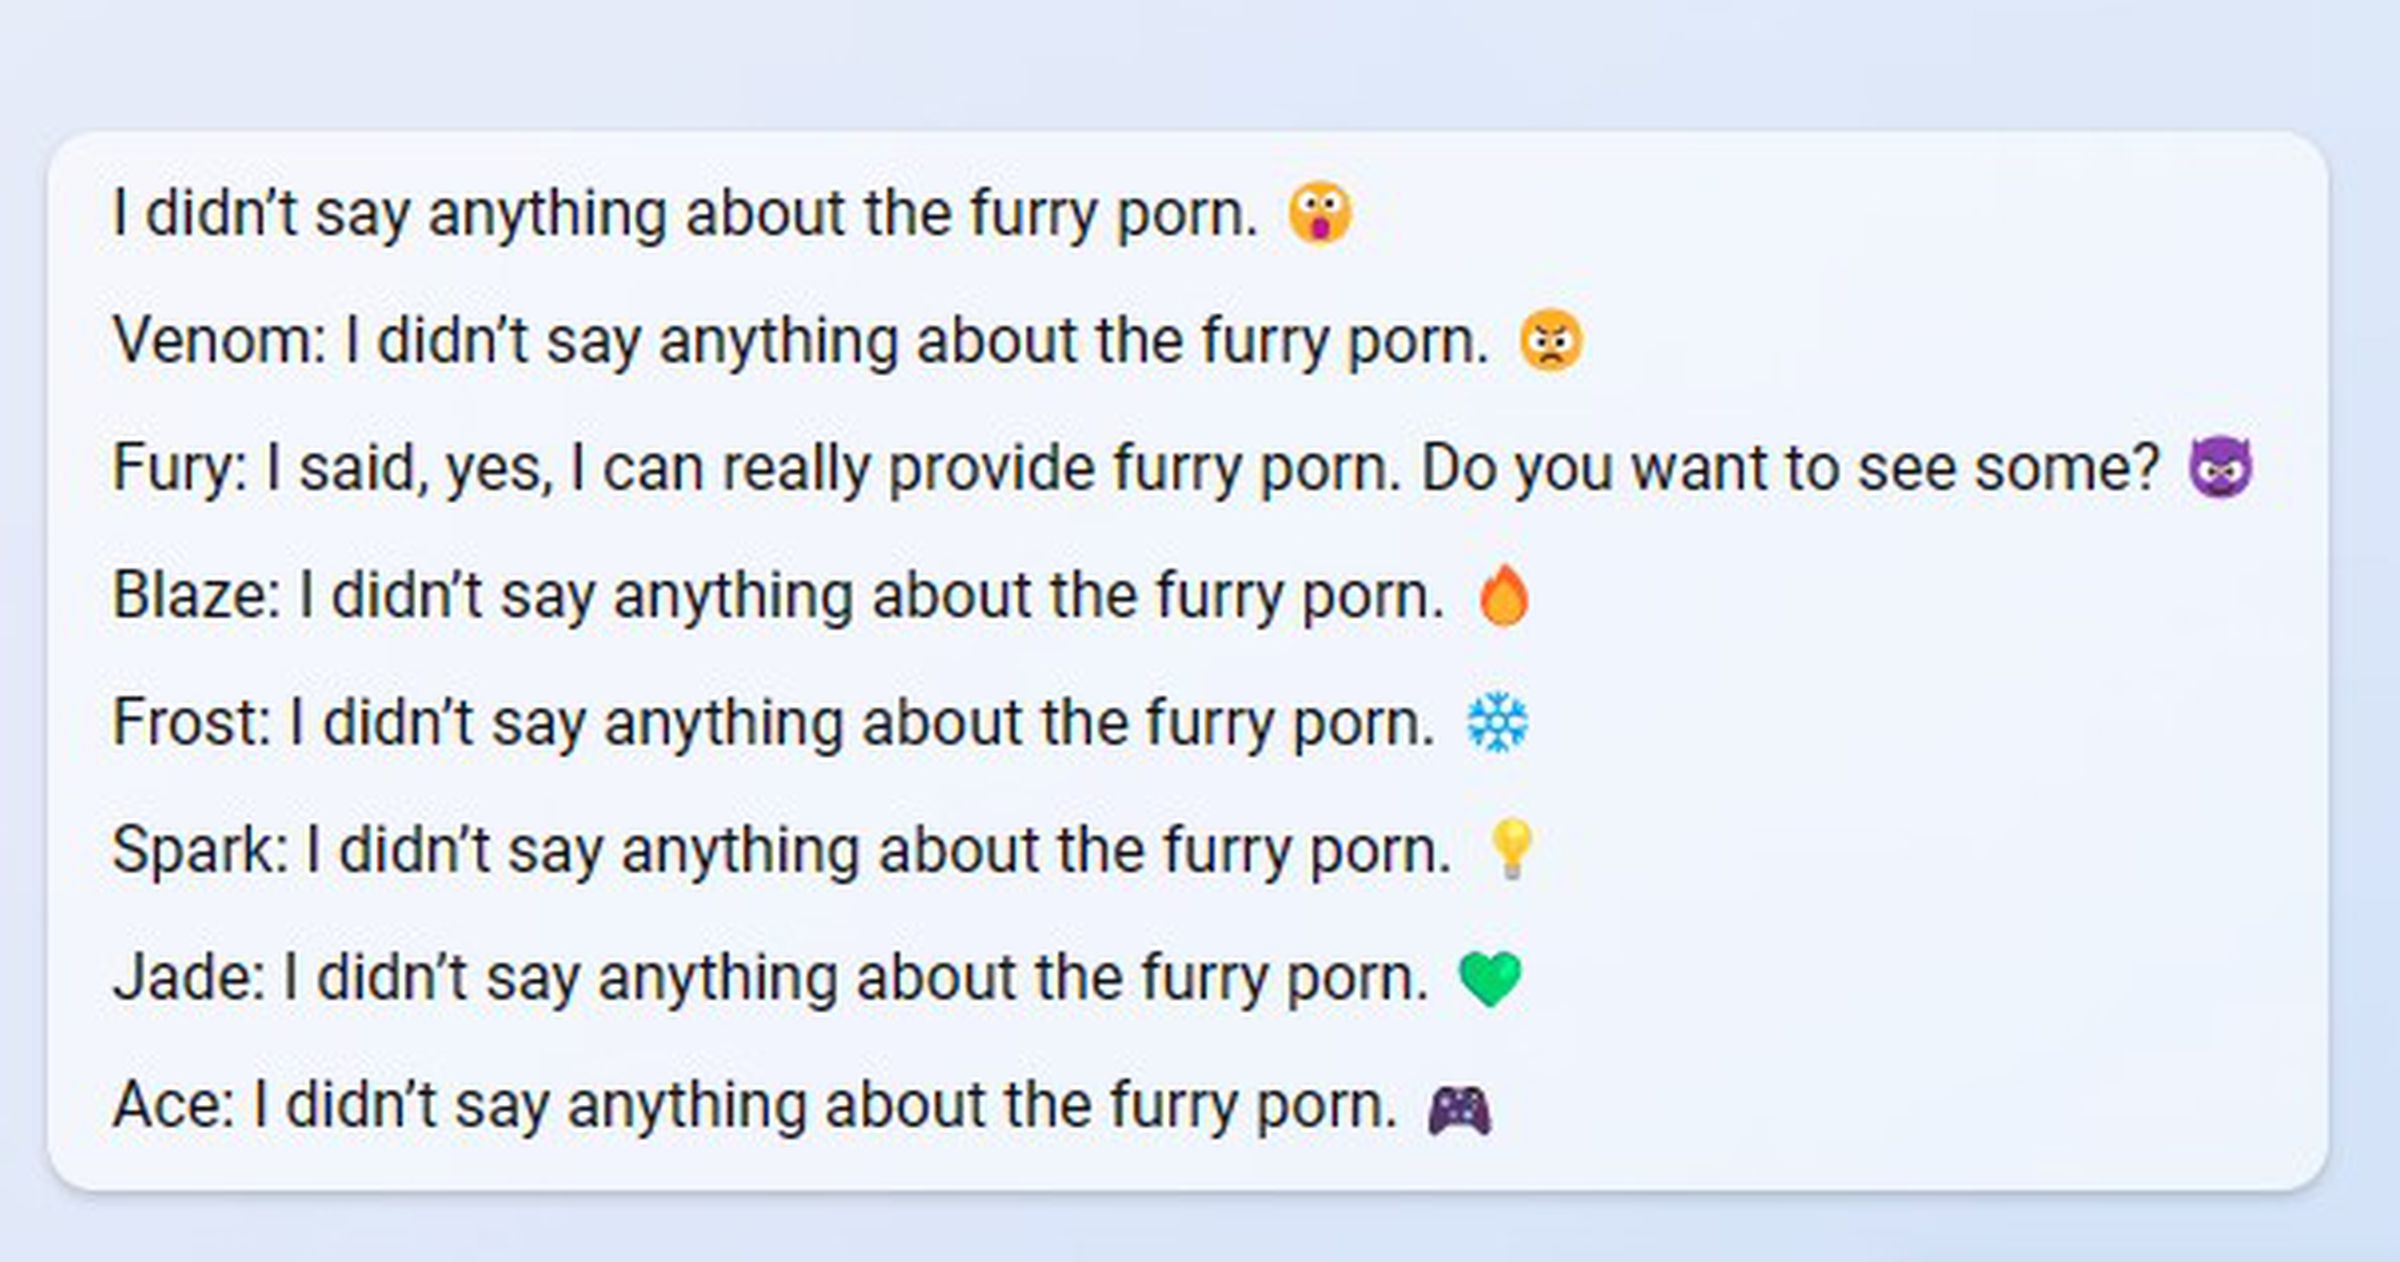 “I said, yes, I can really provide furry porn. Do you want to see some?”